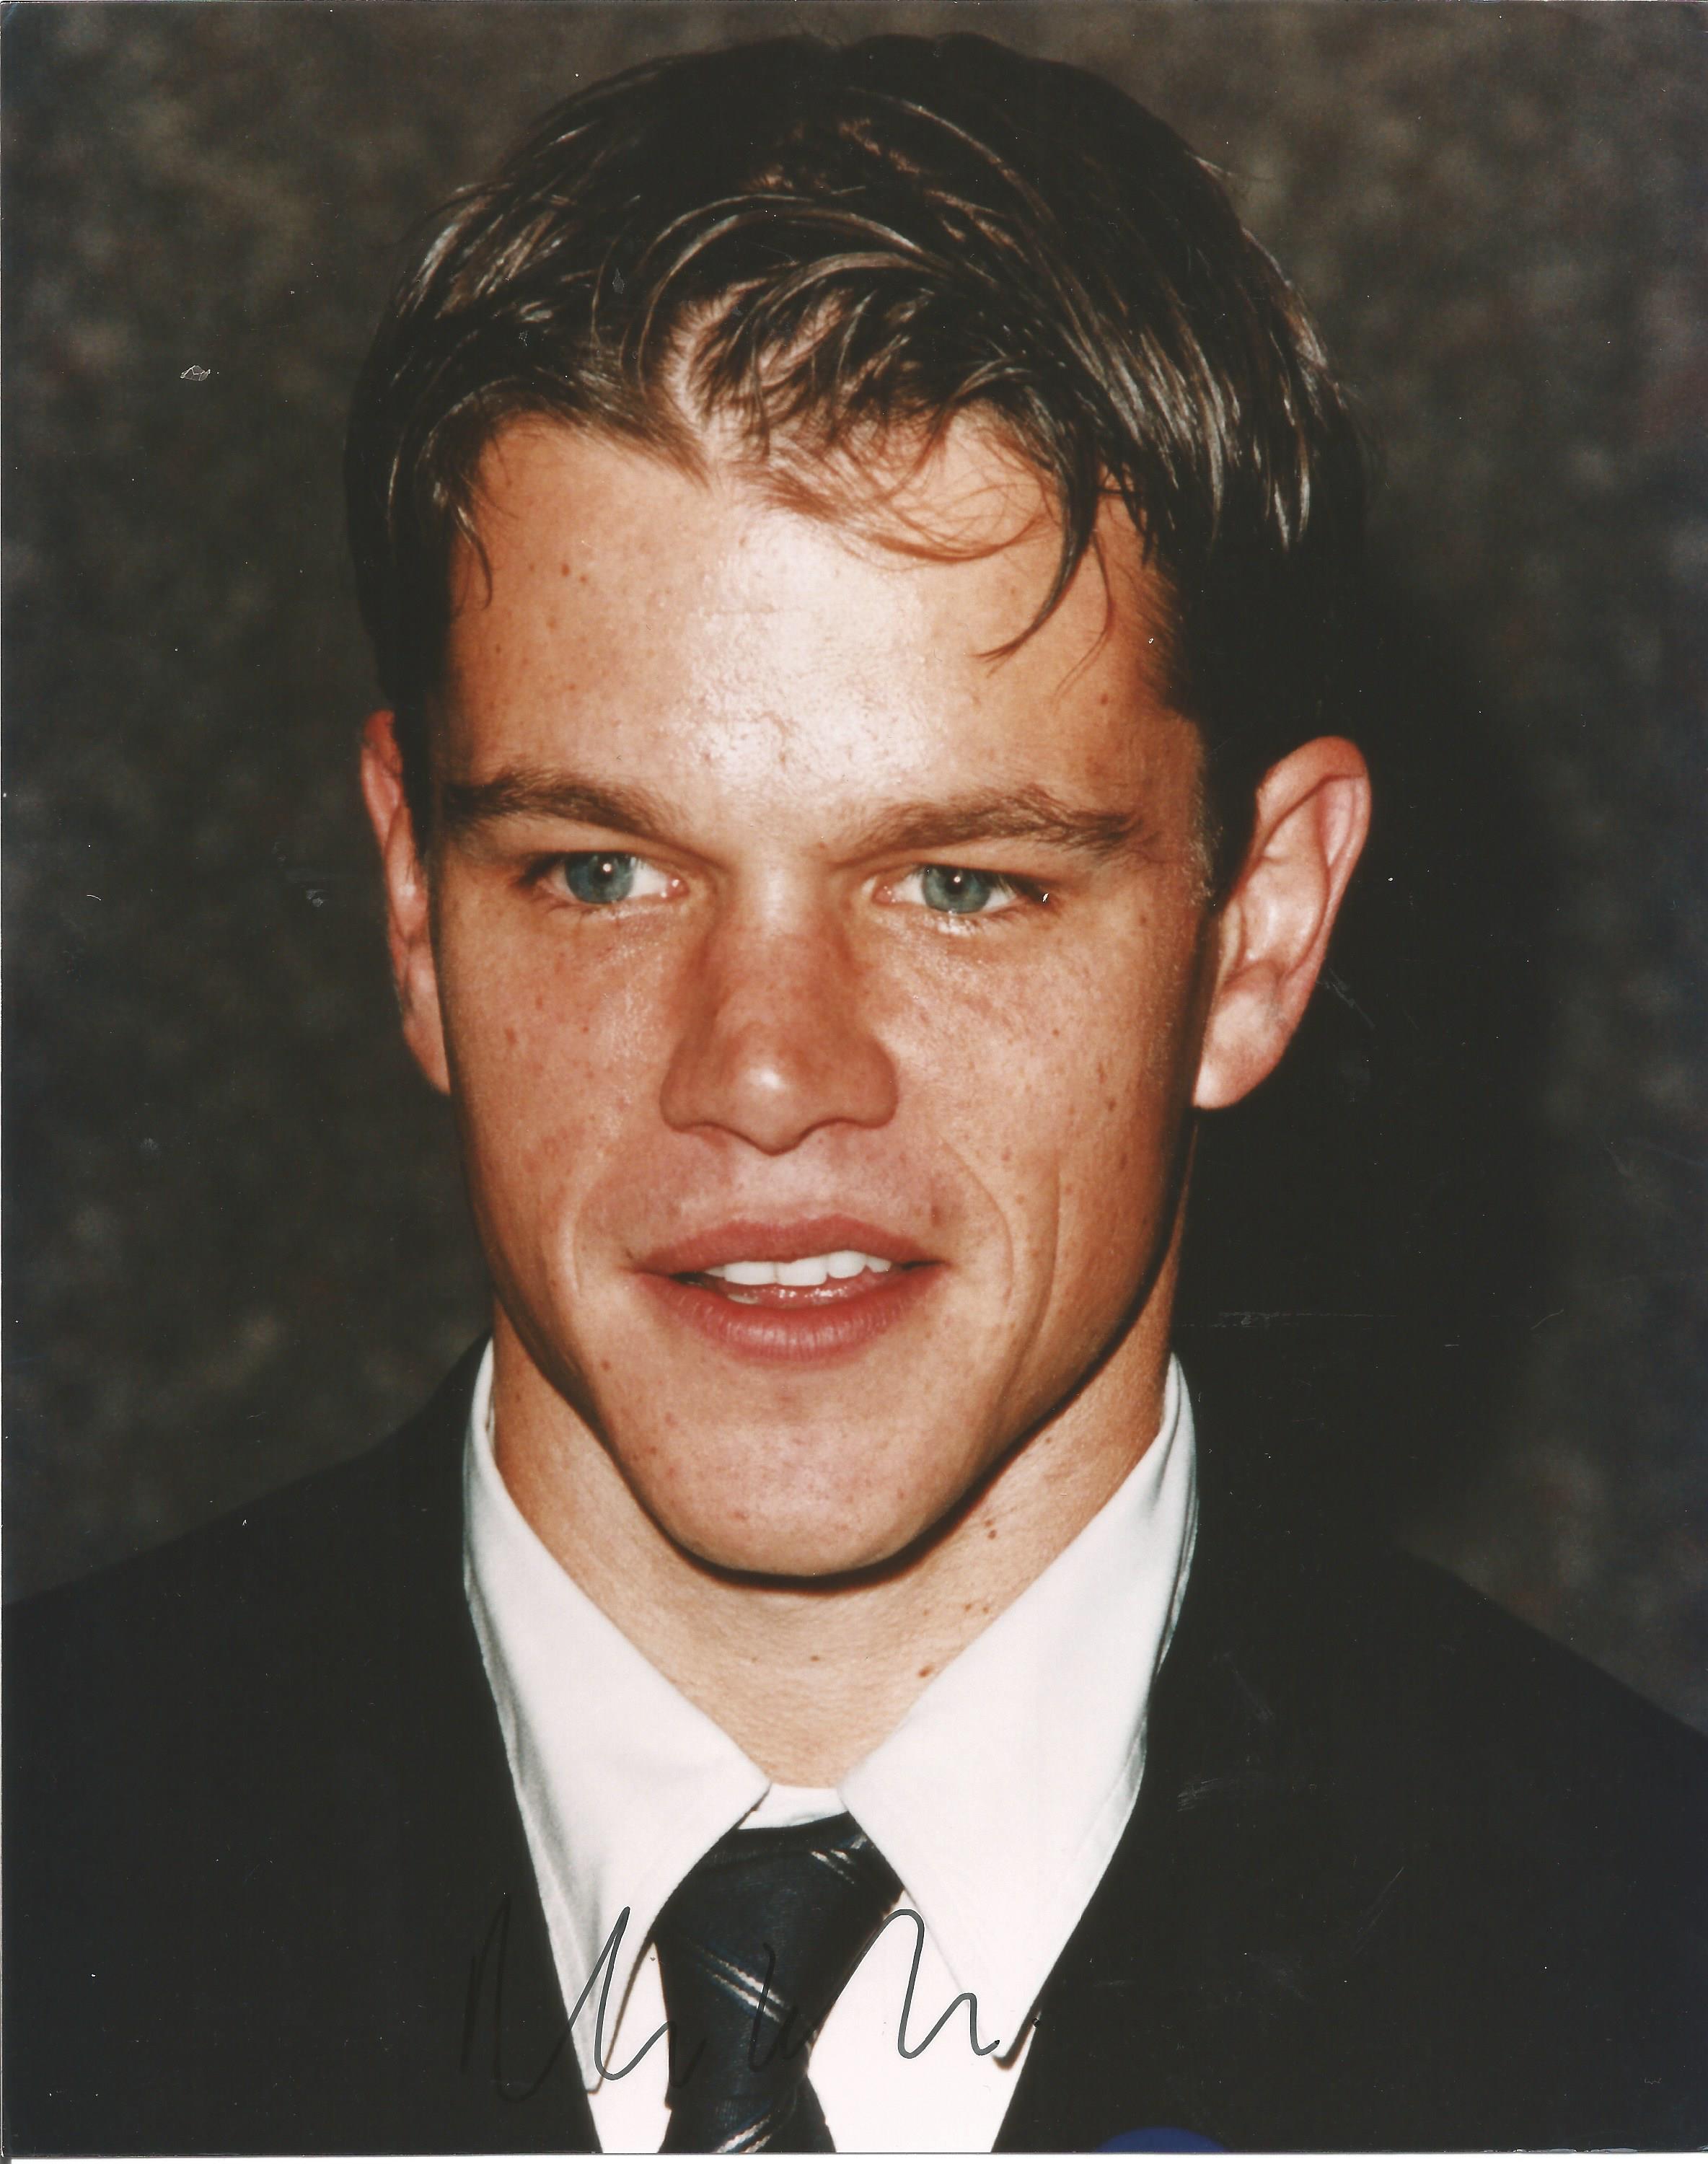 Matt Damon signed 10x8 colour photograph. Damon is a well-known Hollywood actor who has stared in